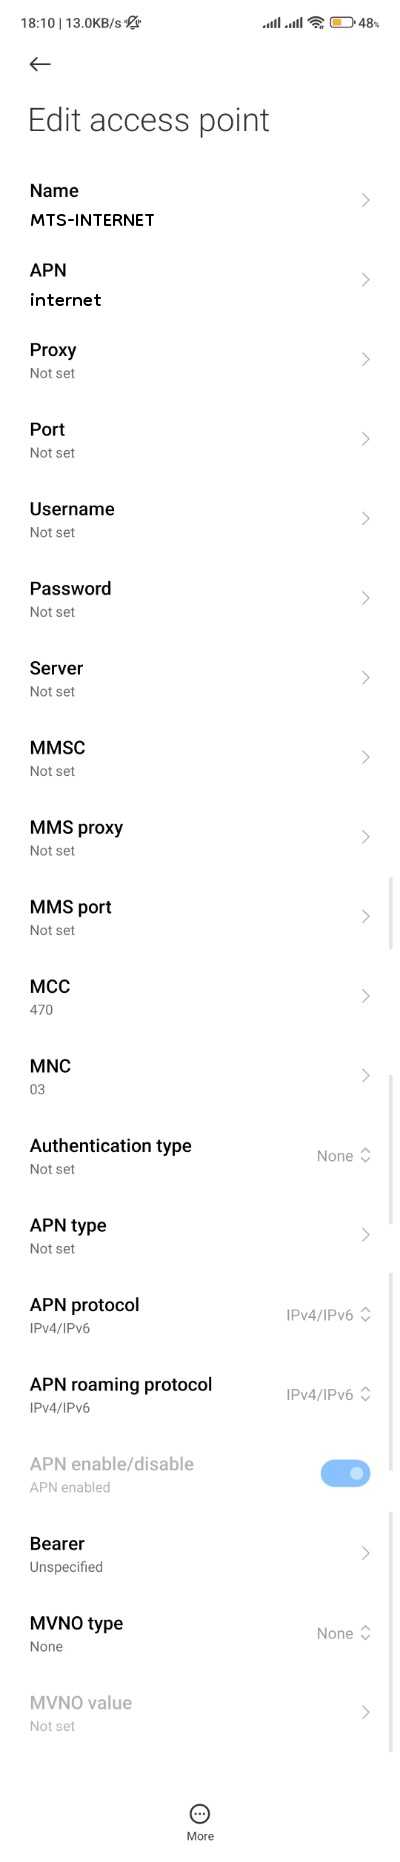 MTS Belarus APN Setiings for Android iPhone 3G 4G Internet